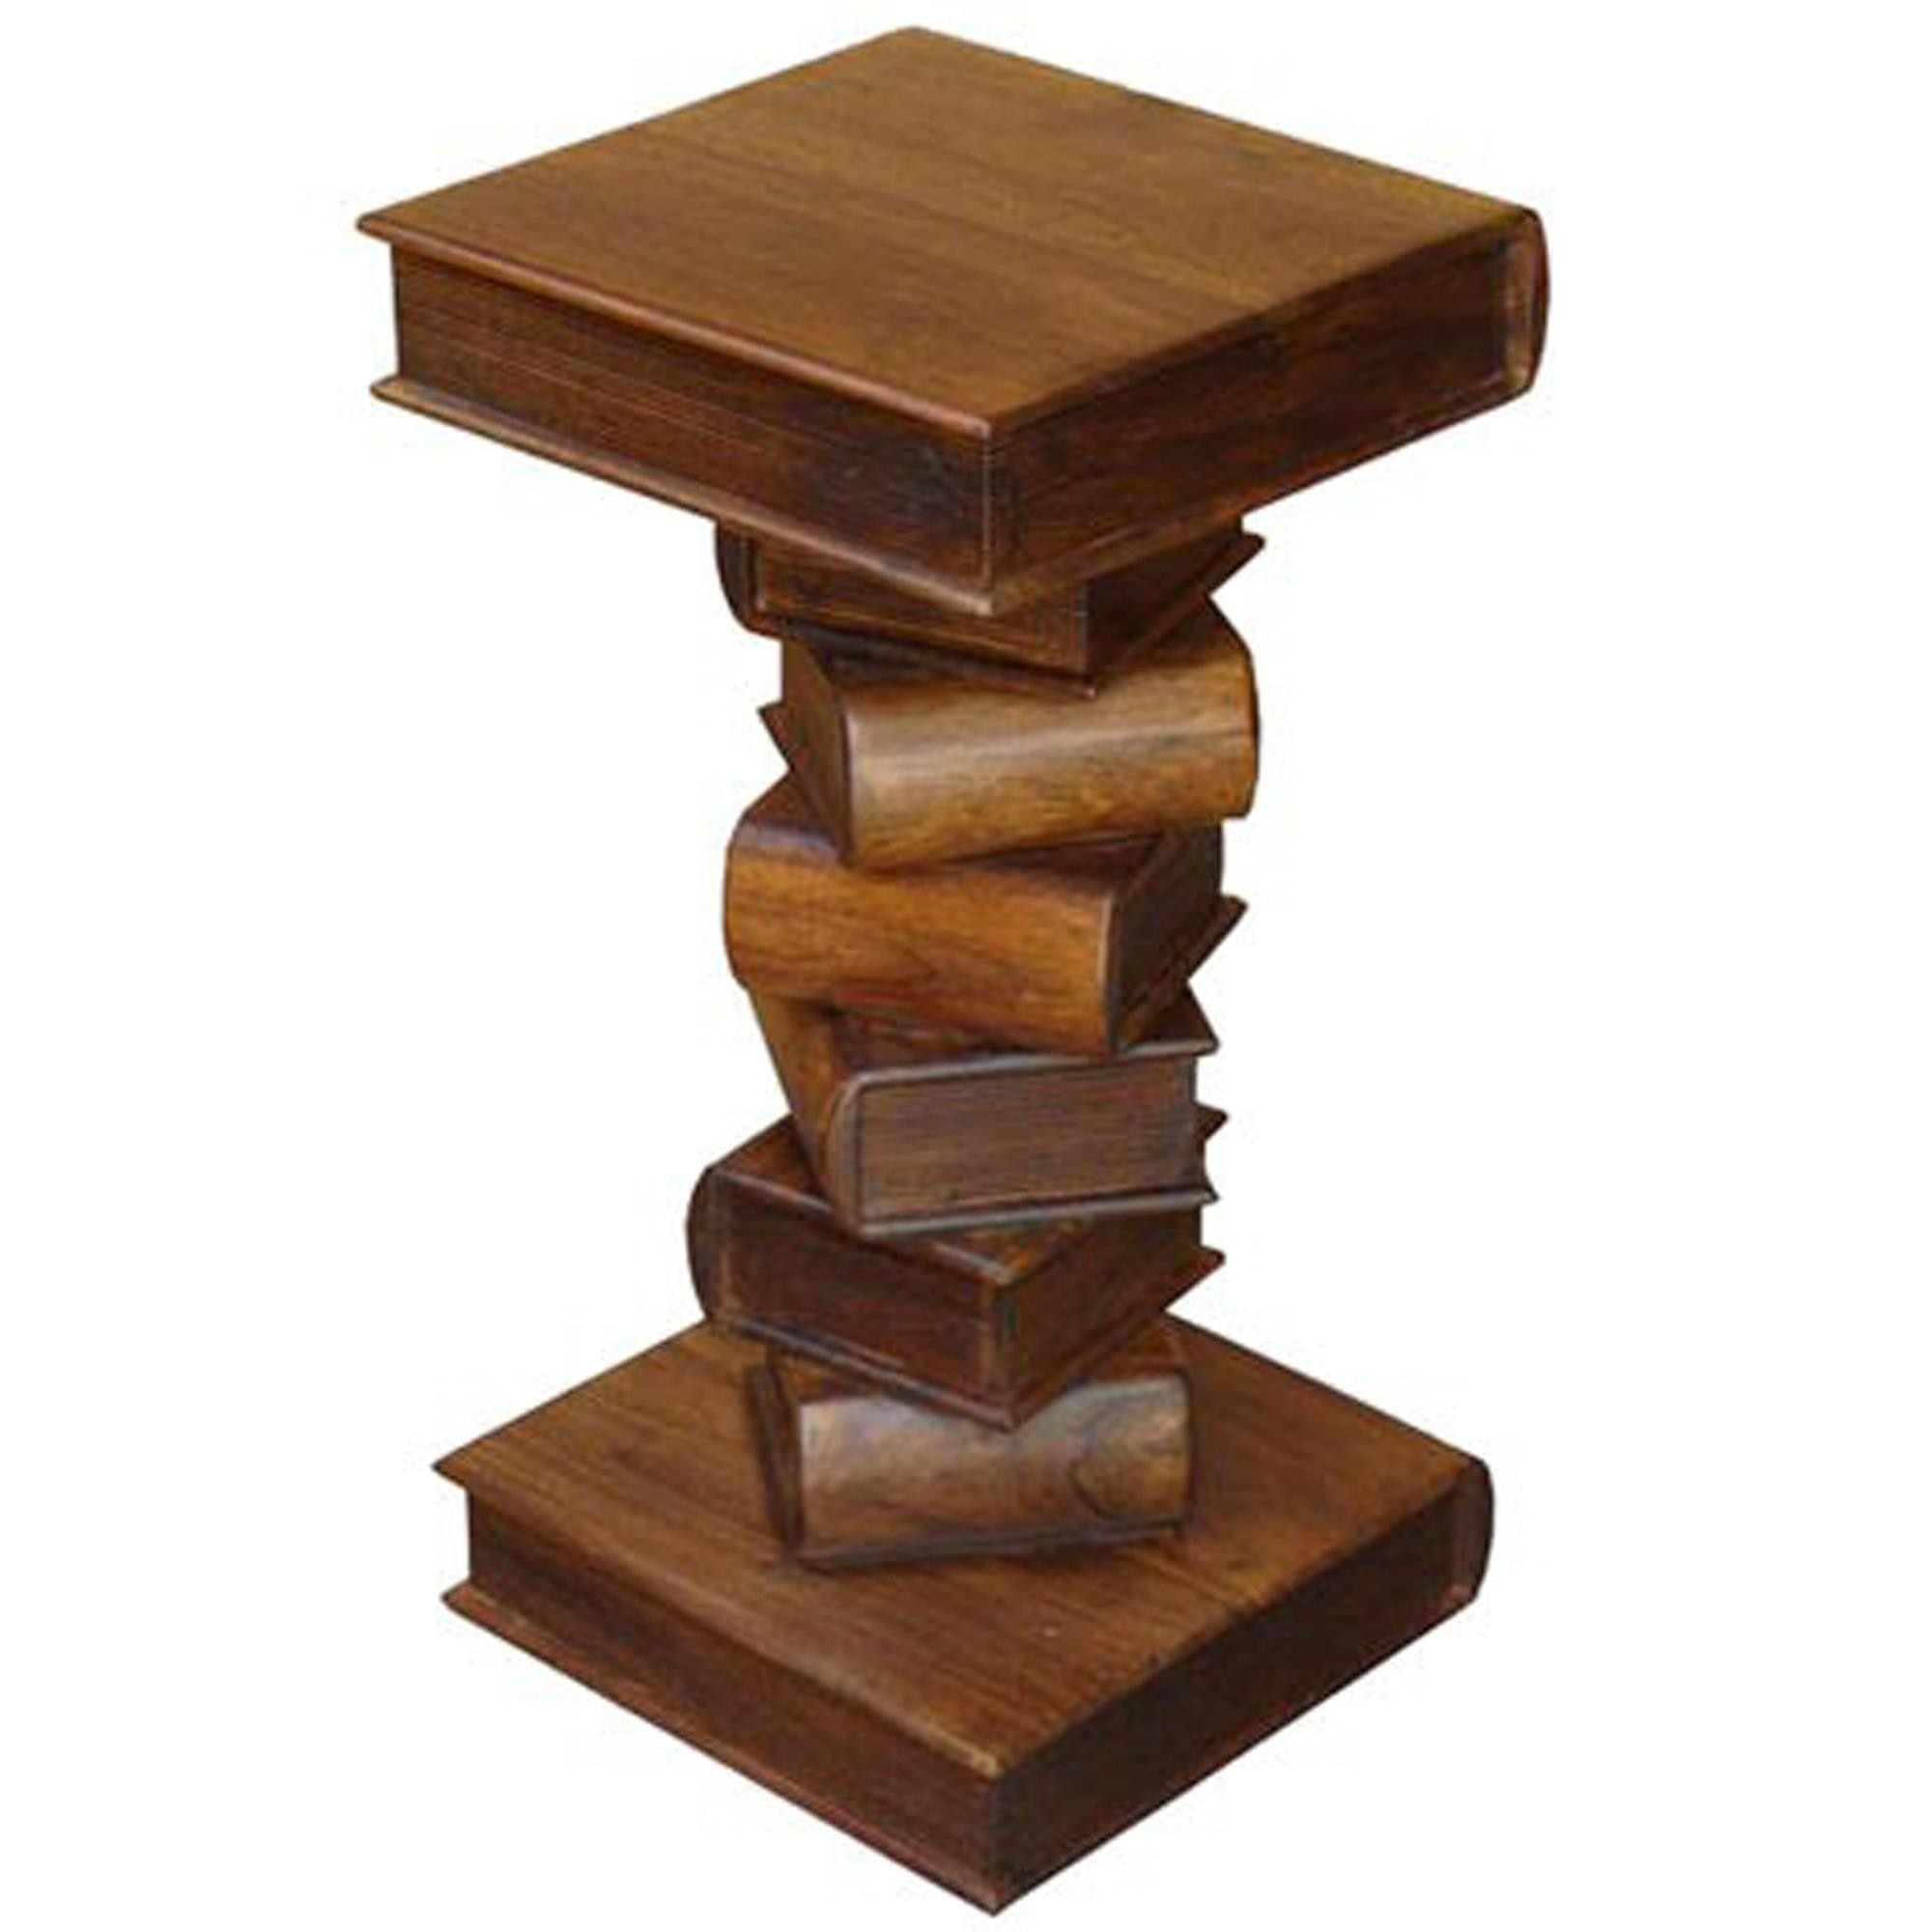 Acacia books large side table small end tables